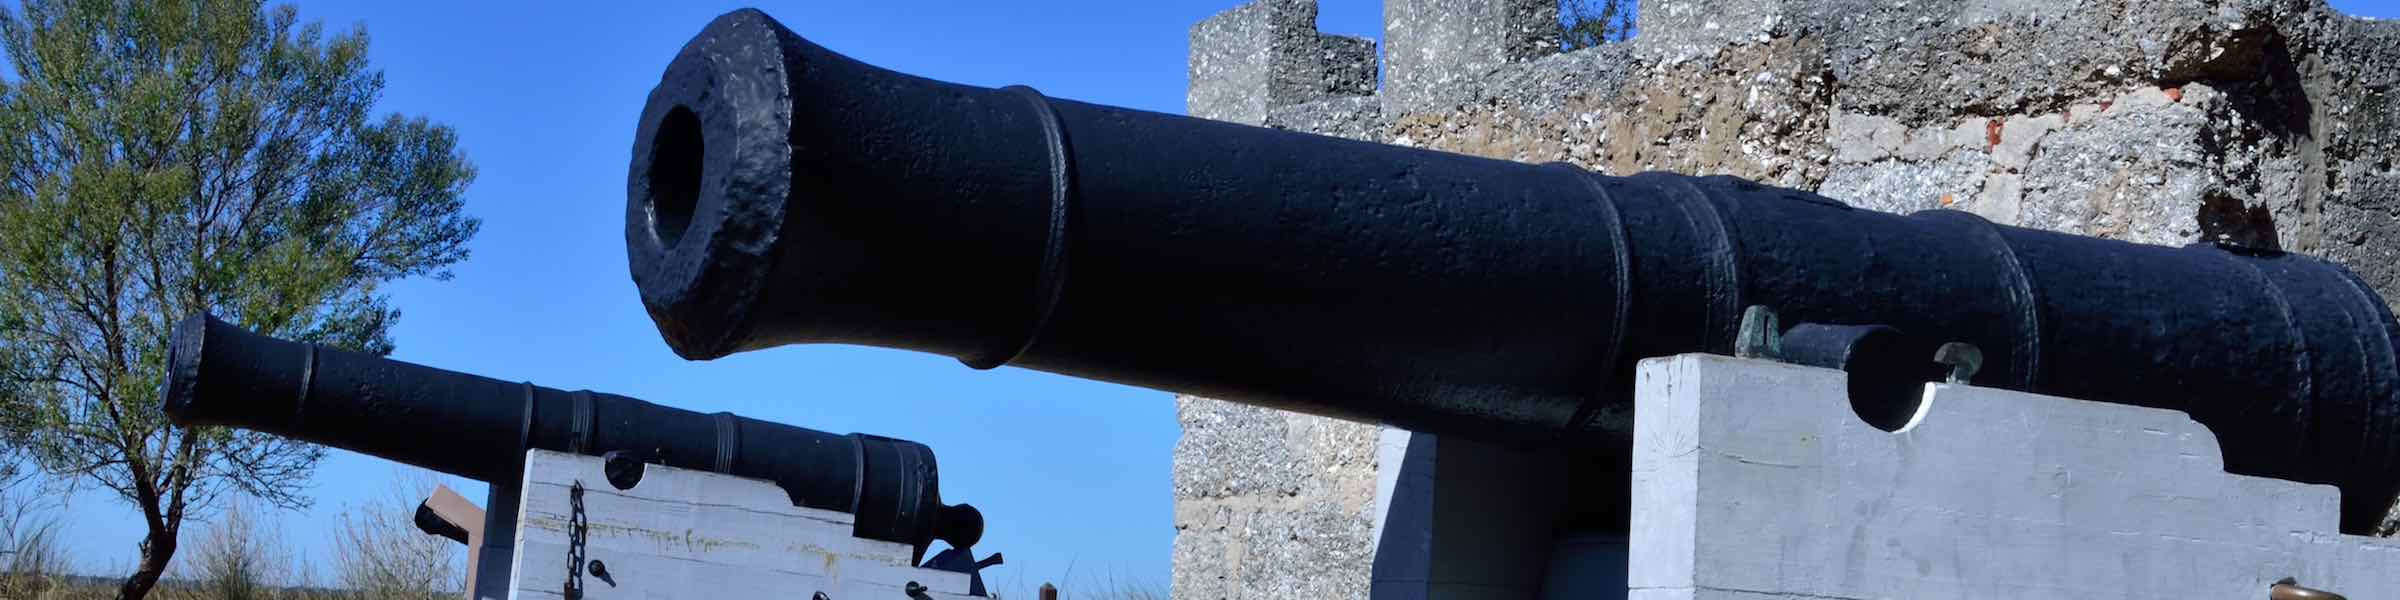 Cannon and the King's Magazine at Fort Frederica National Monument, St Simons Island, Georgia.